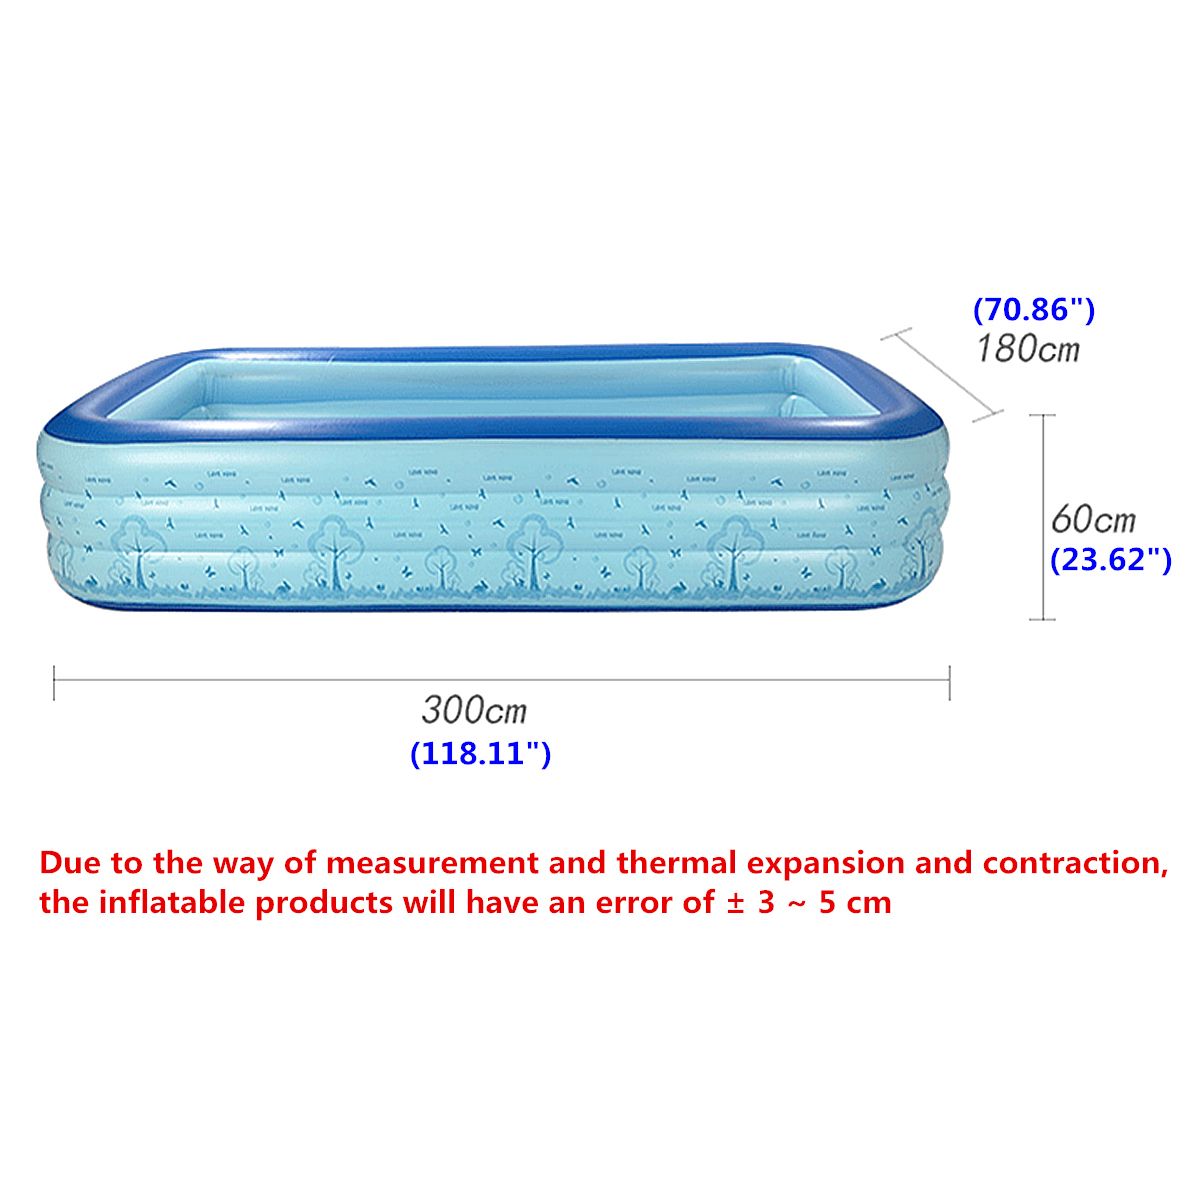 118-Inflatable-Swimming-Pool-Kids-Children-Adult-Family-Outdoor-Water-Play-1685017